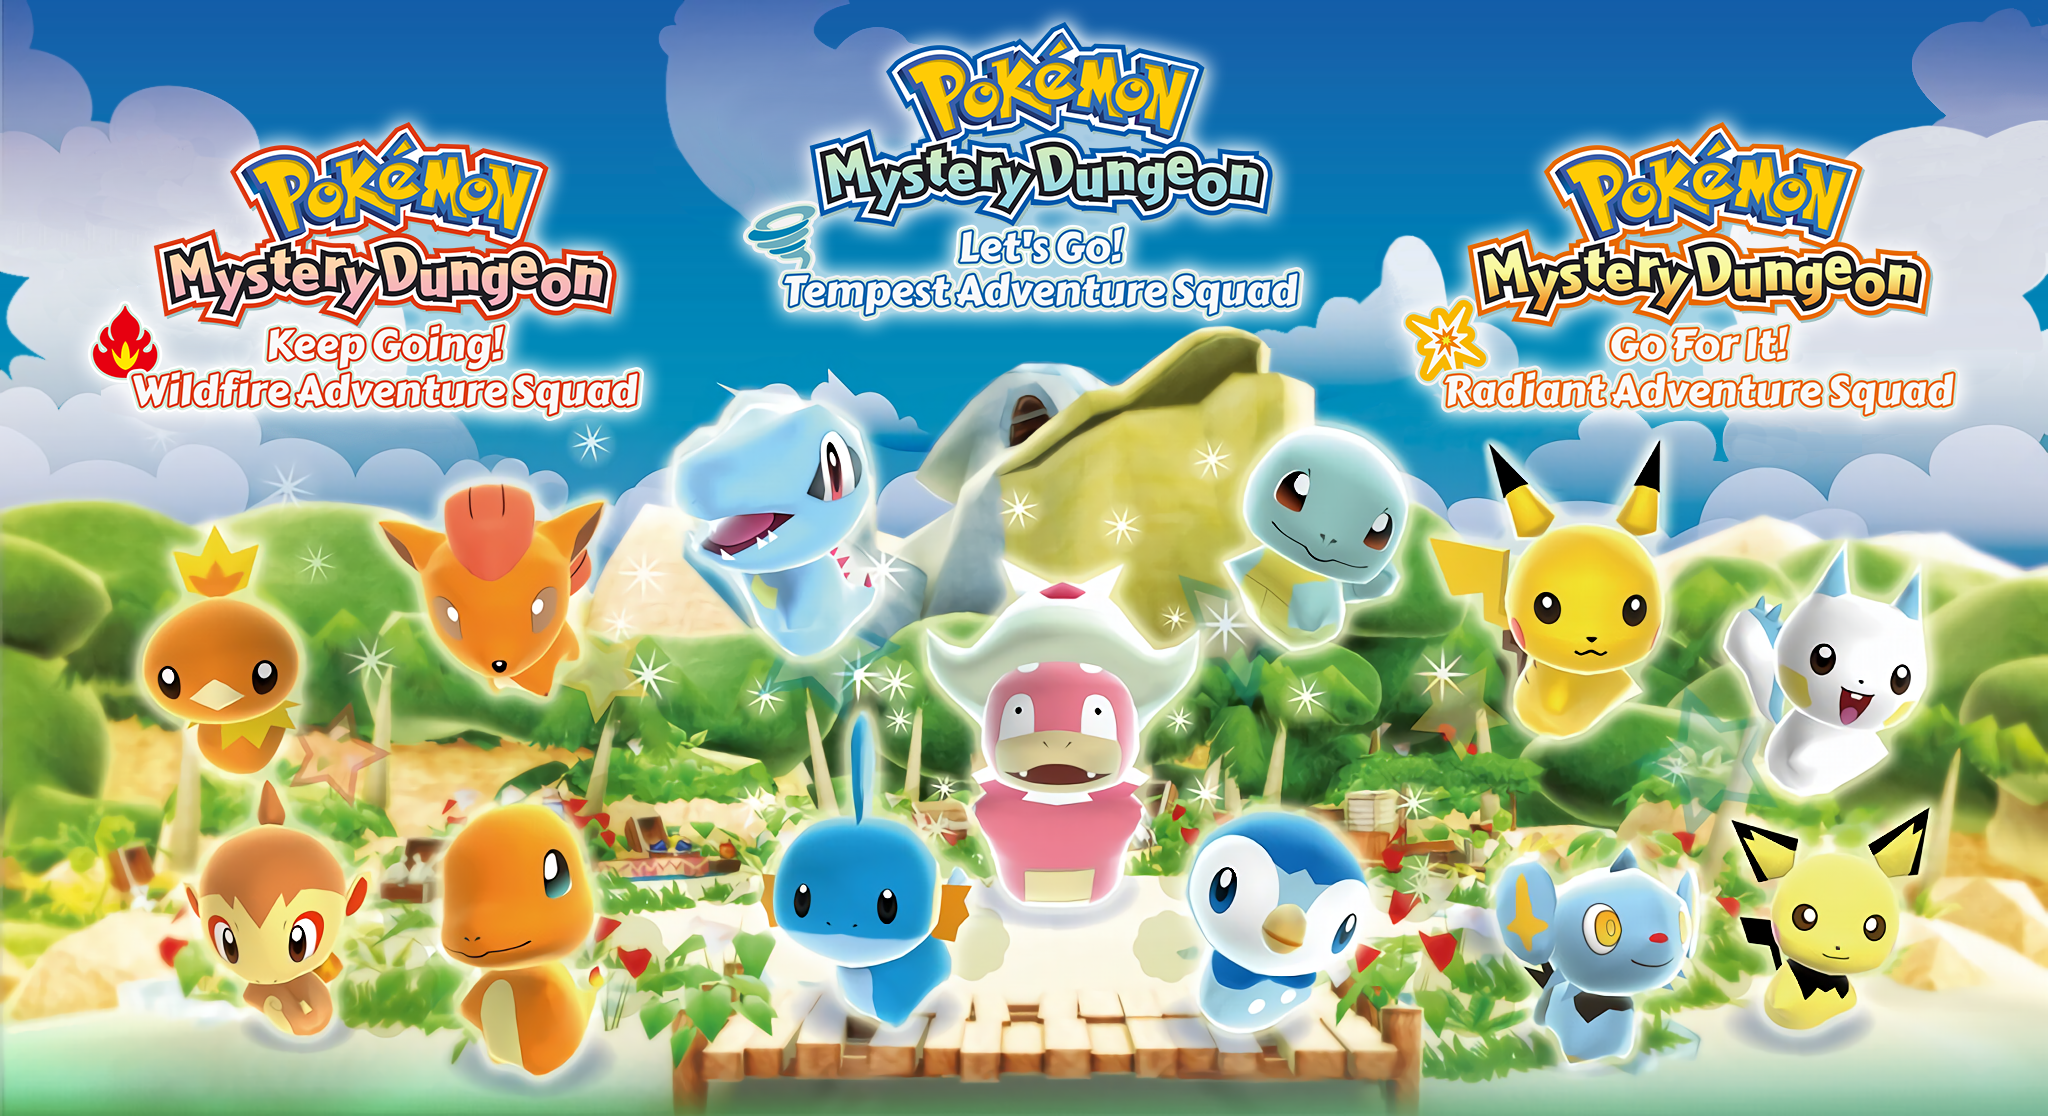 Pokémon Mystery Dungeon: Go For It! Light Adventure Squad